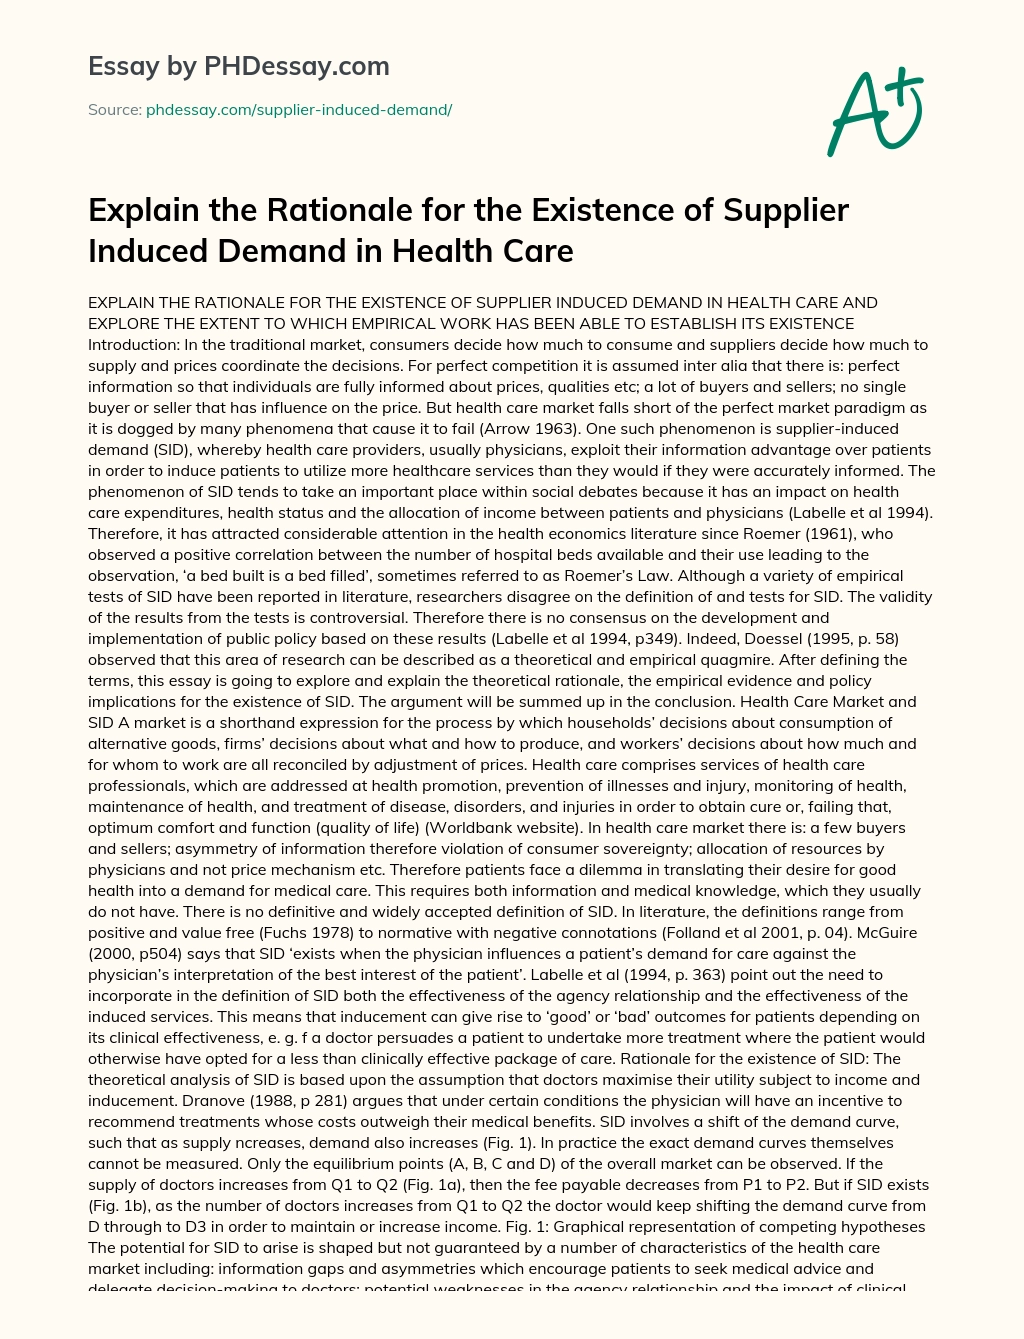 Explain the Rationale for the Existence of Supplier Induced Demand in Health Care essay